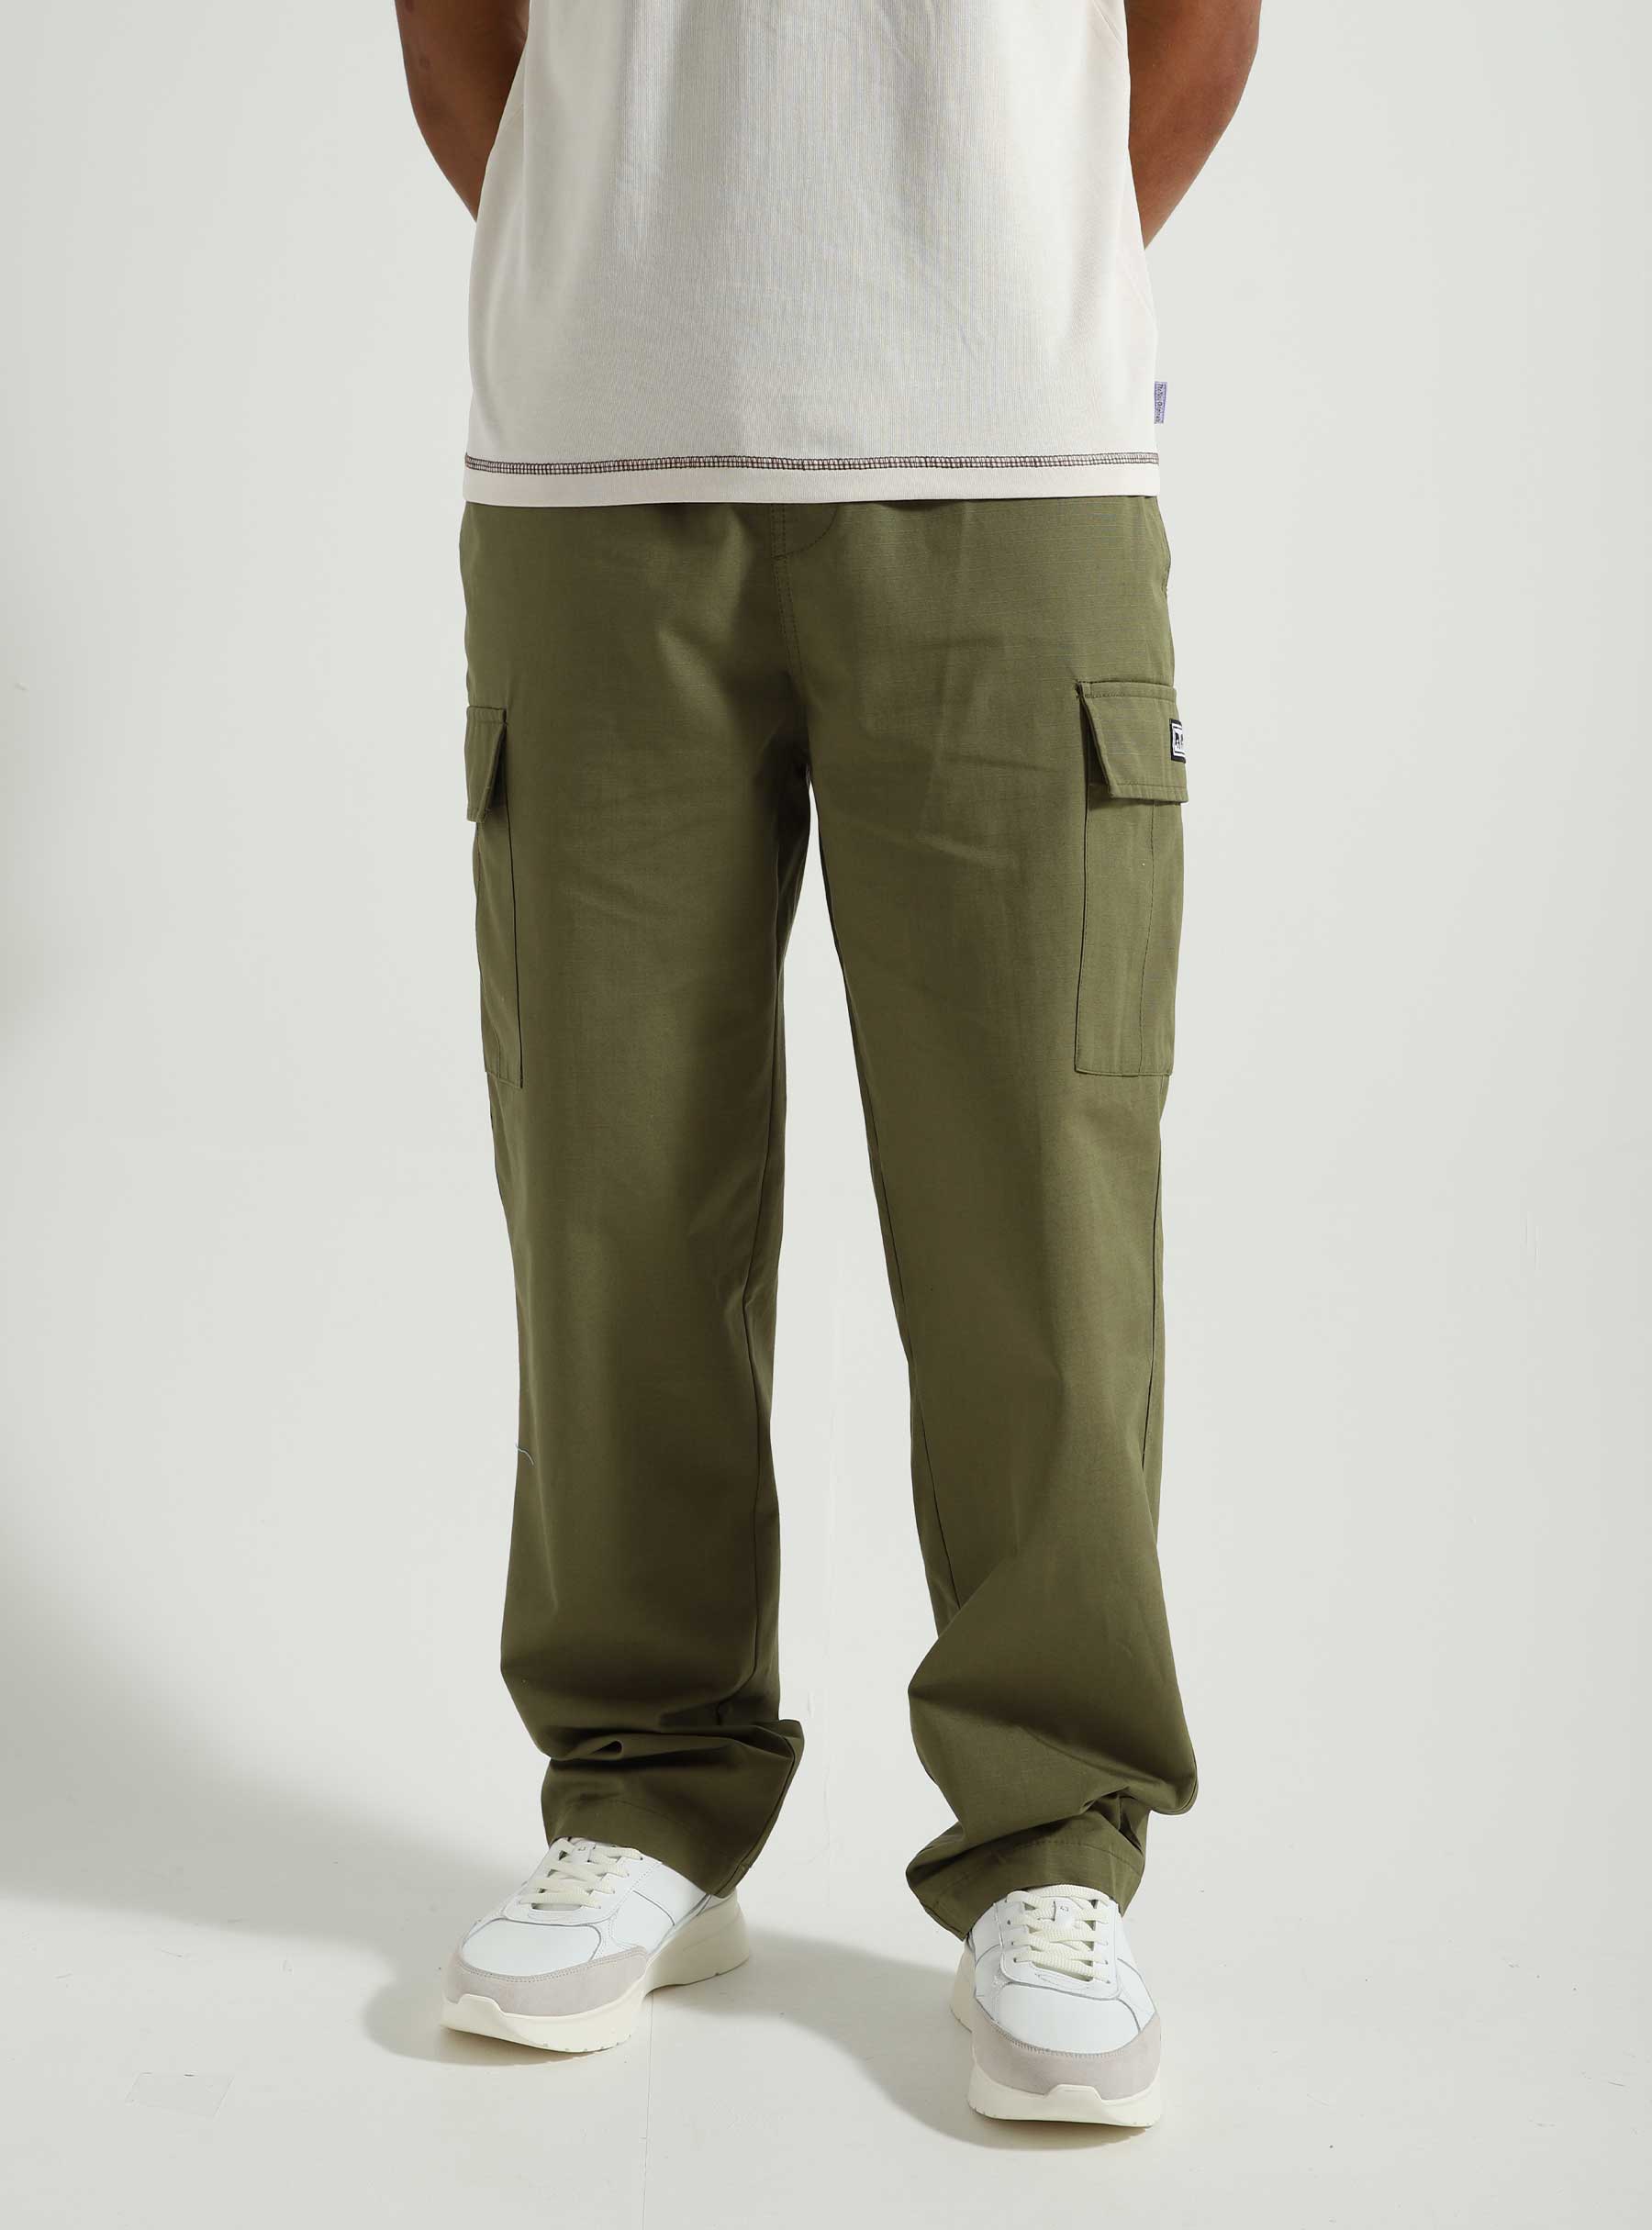 Obey Clothing Recon Cargo Pants | evo